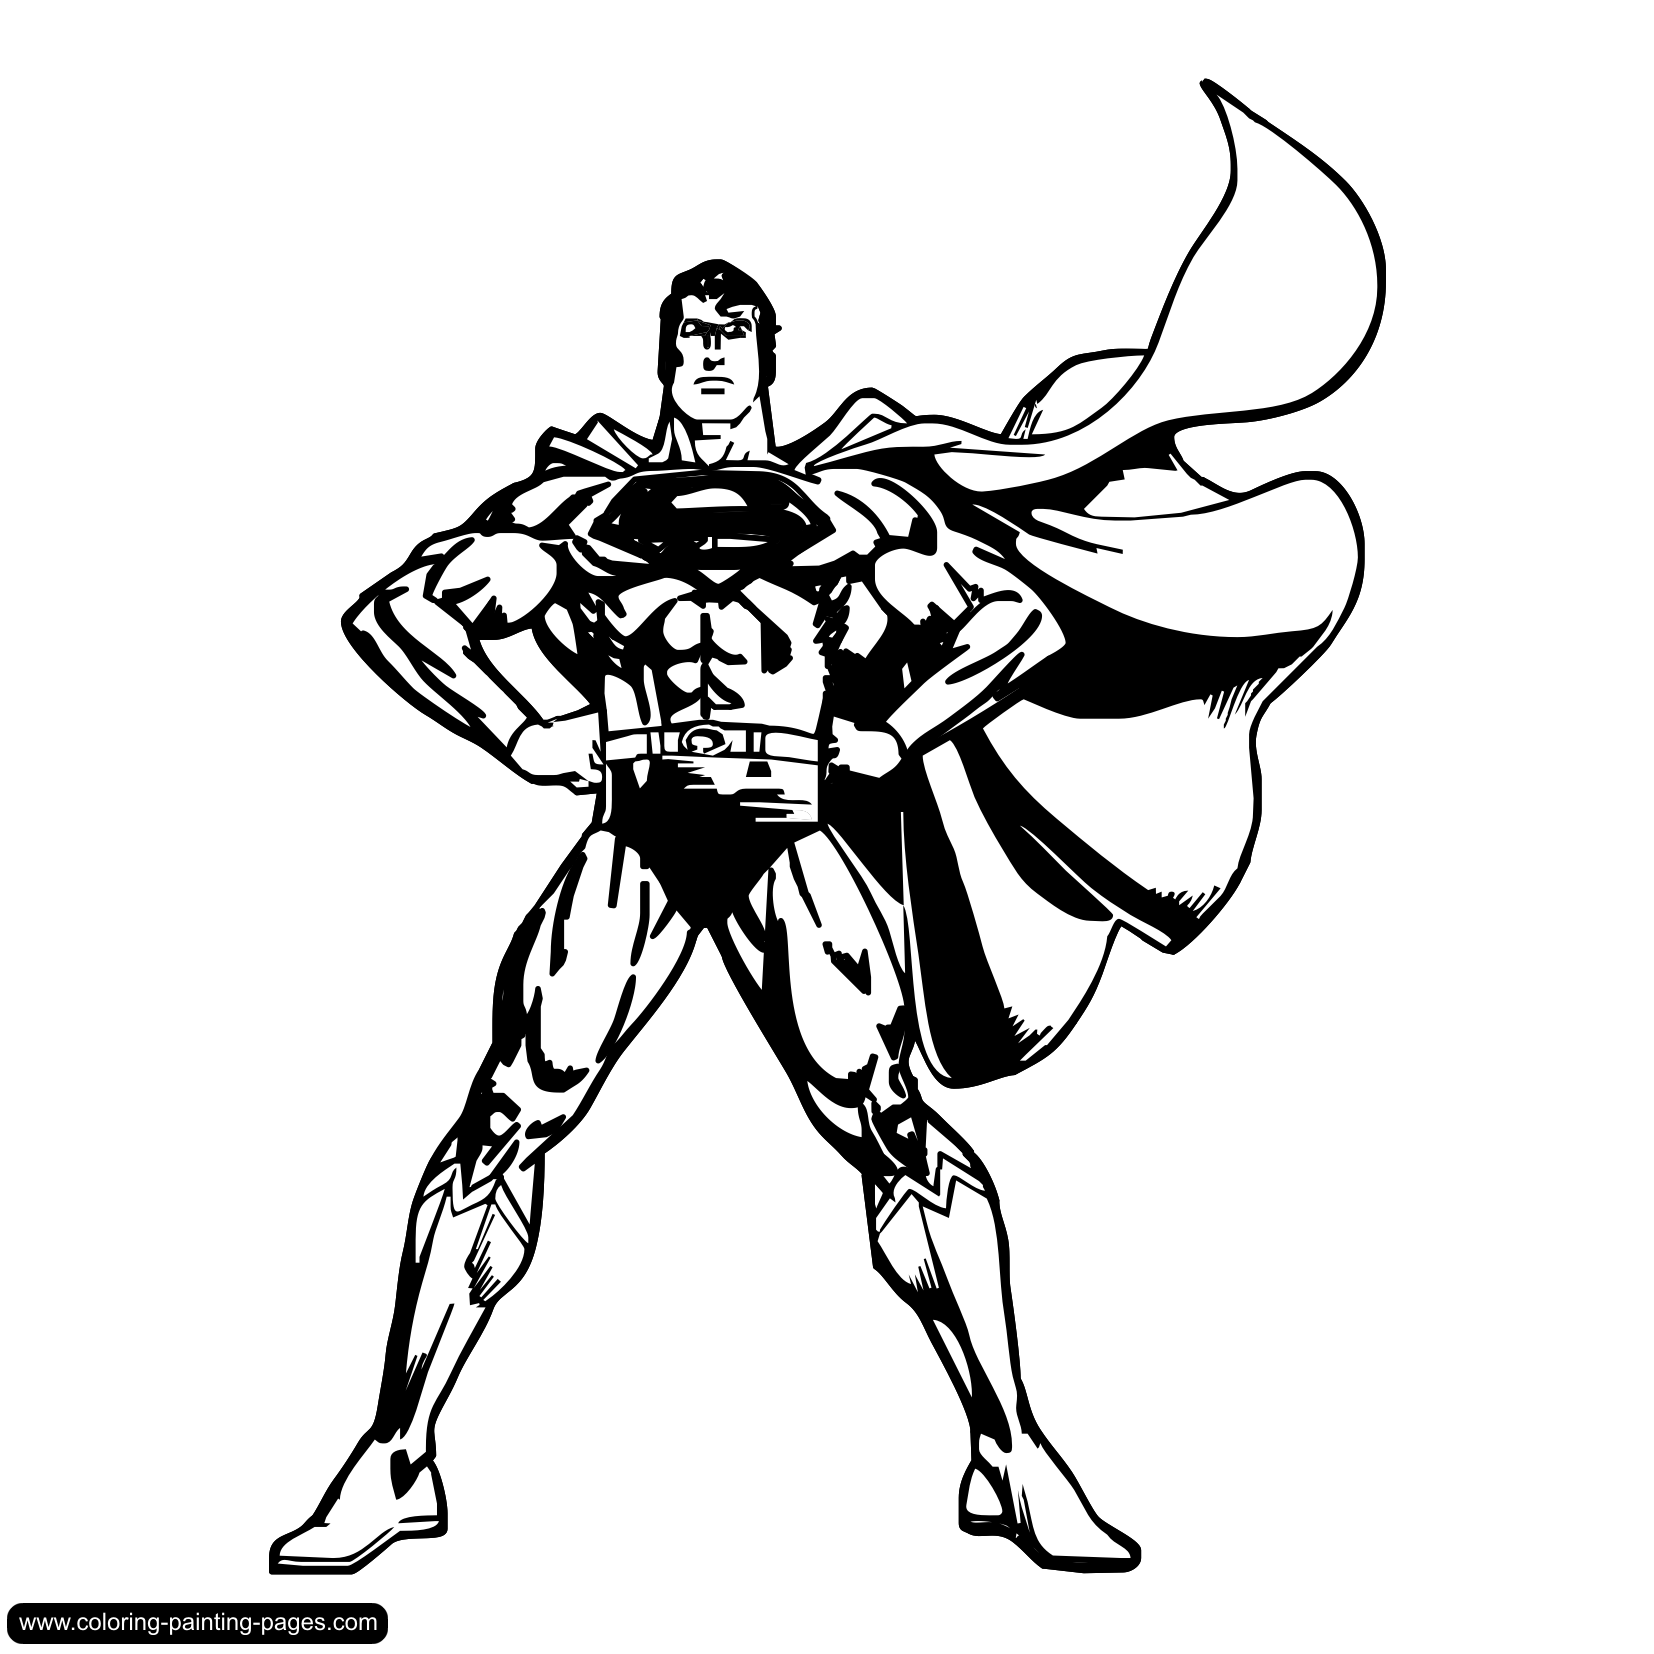 Superman clipart black and white » Clipart Station.